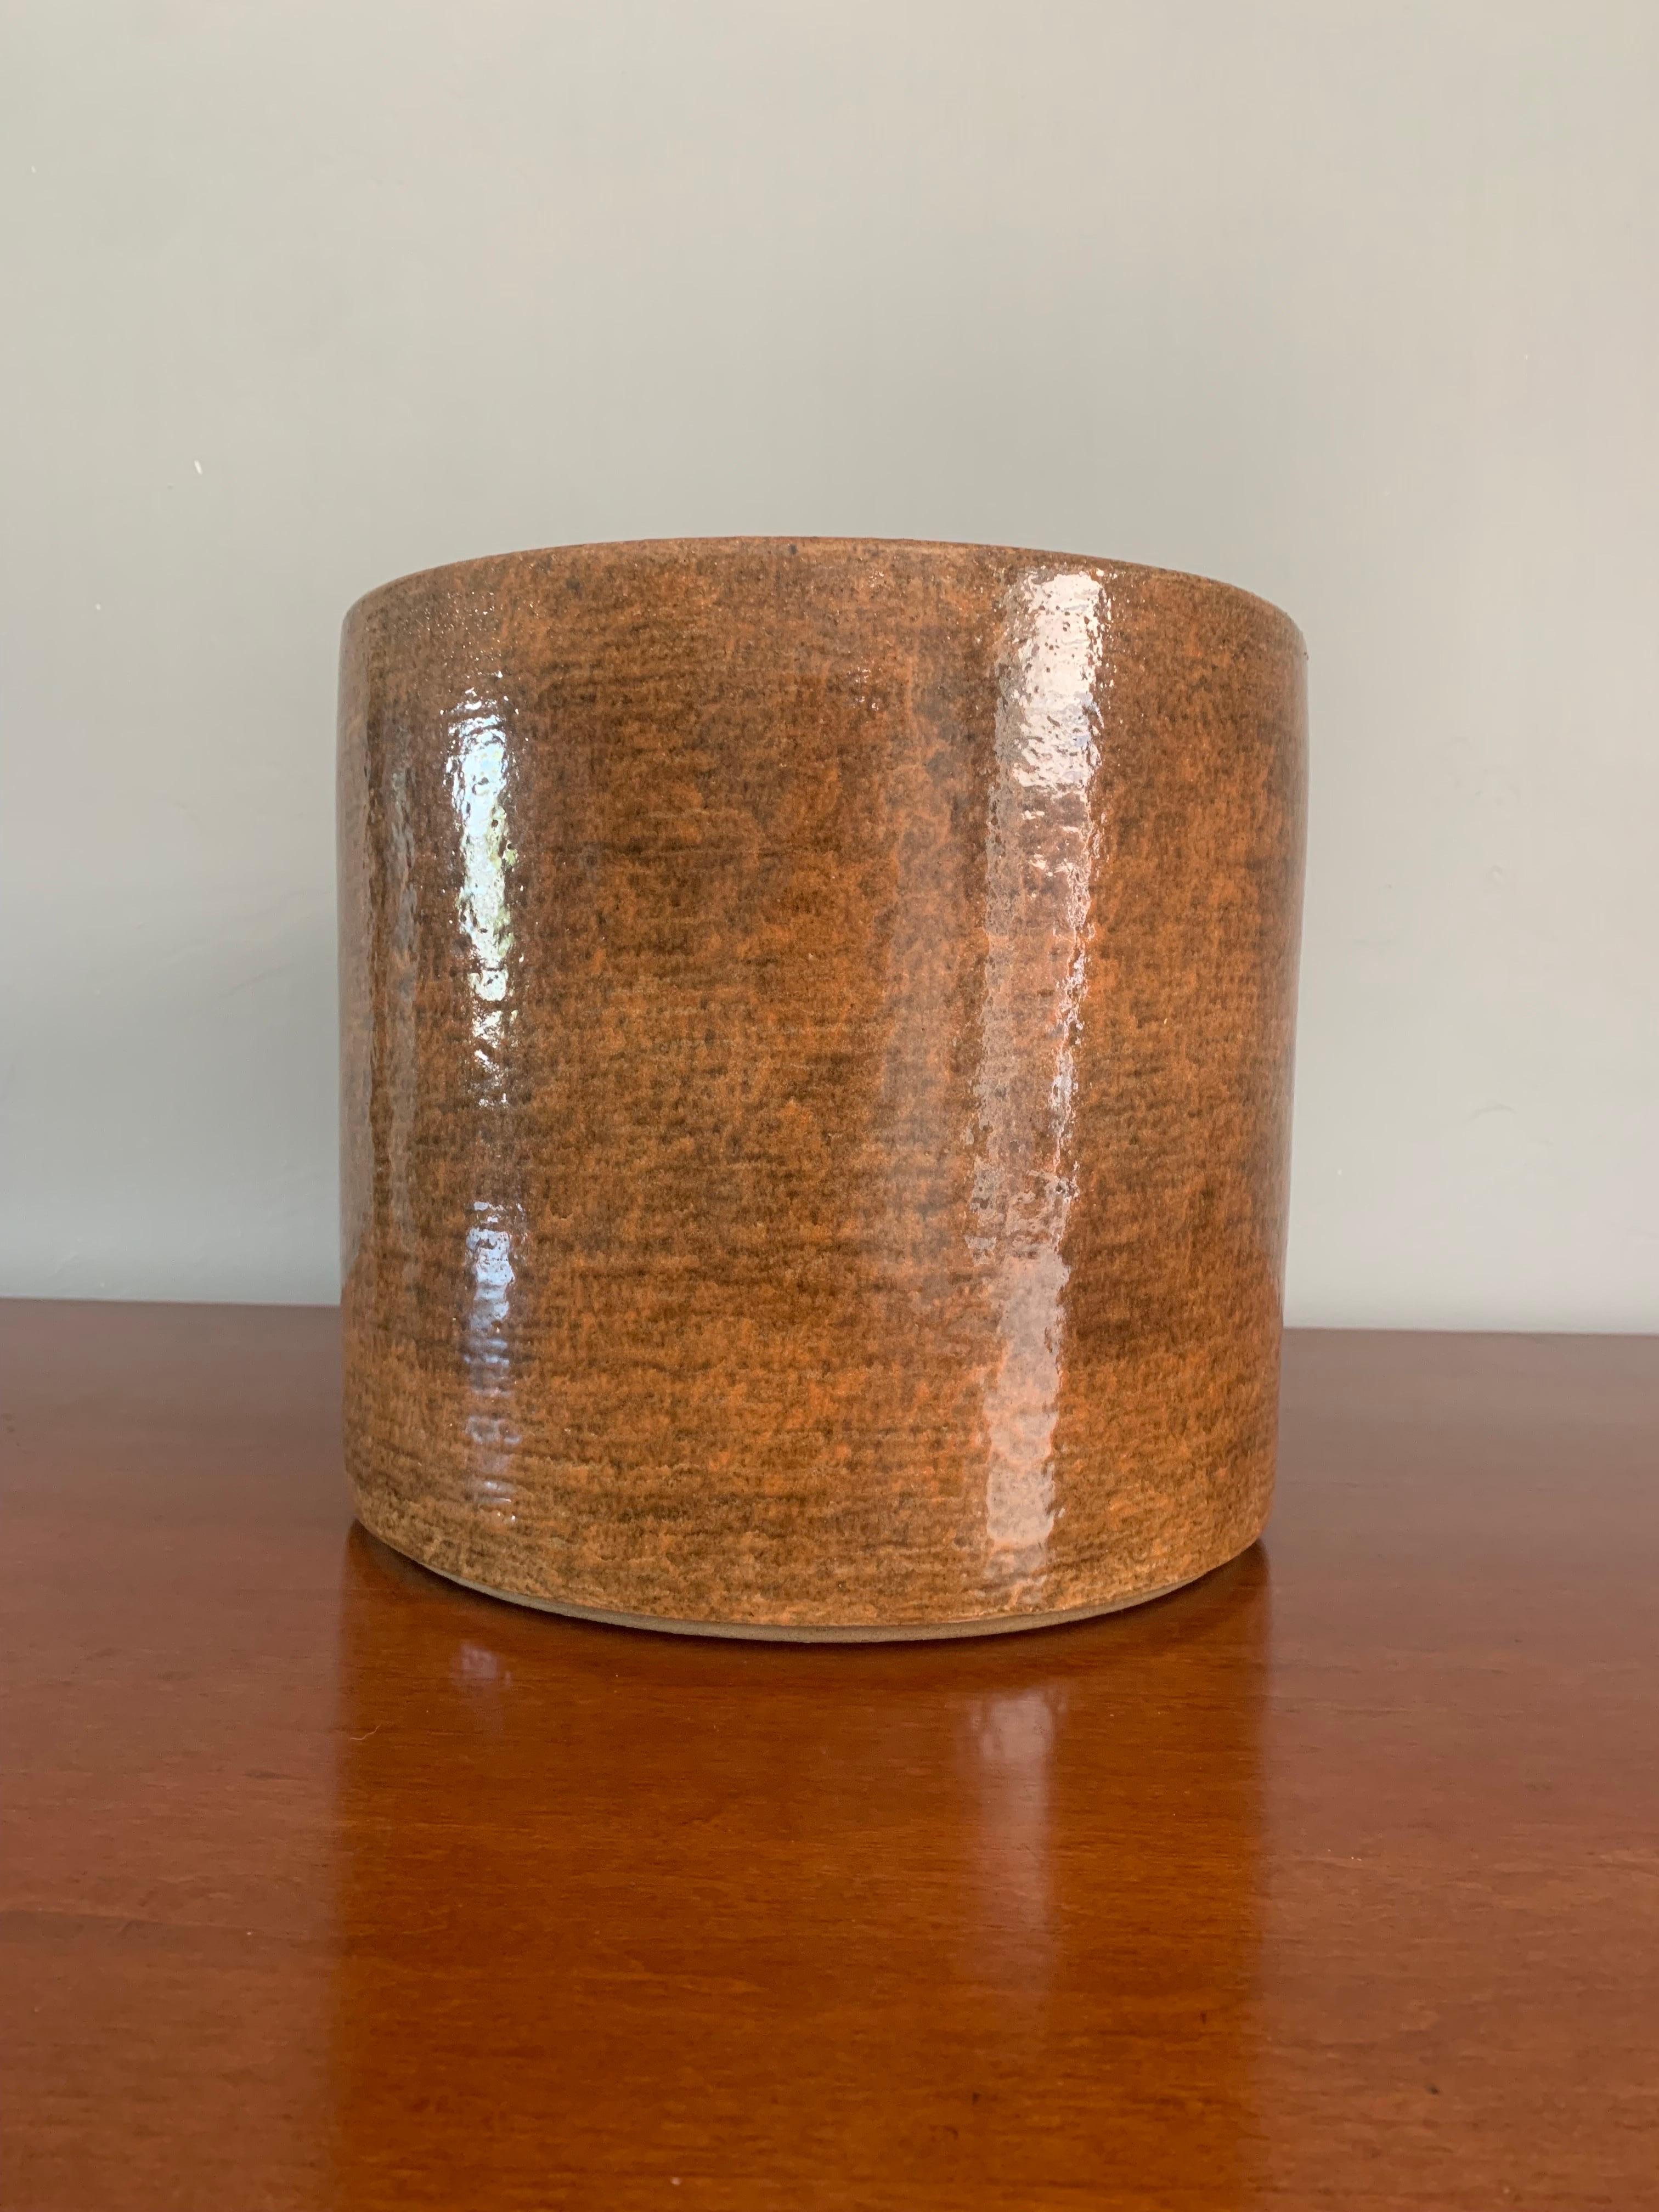 A beautiful example of the classic Gainey Ceramics AC-12 planter. Sporting a textured brown glaze. In excellent vintage condition. 

Planter is 12.5” deep
12.5” wide
And 11” tall

The bottom is not finished. 